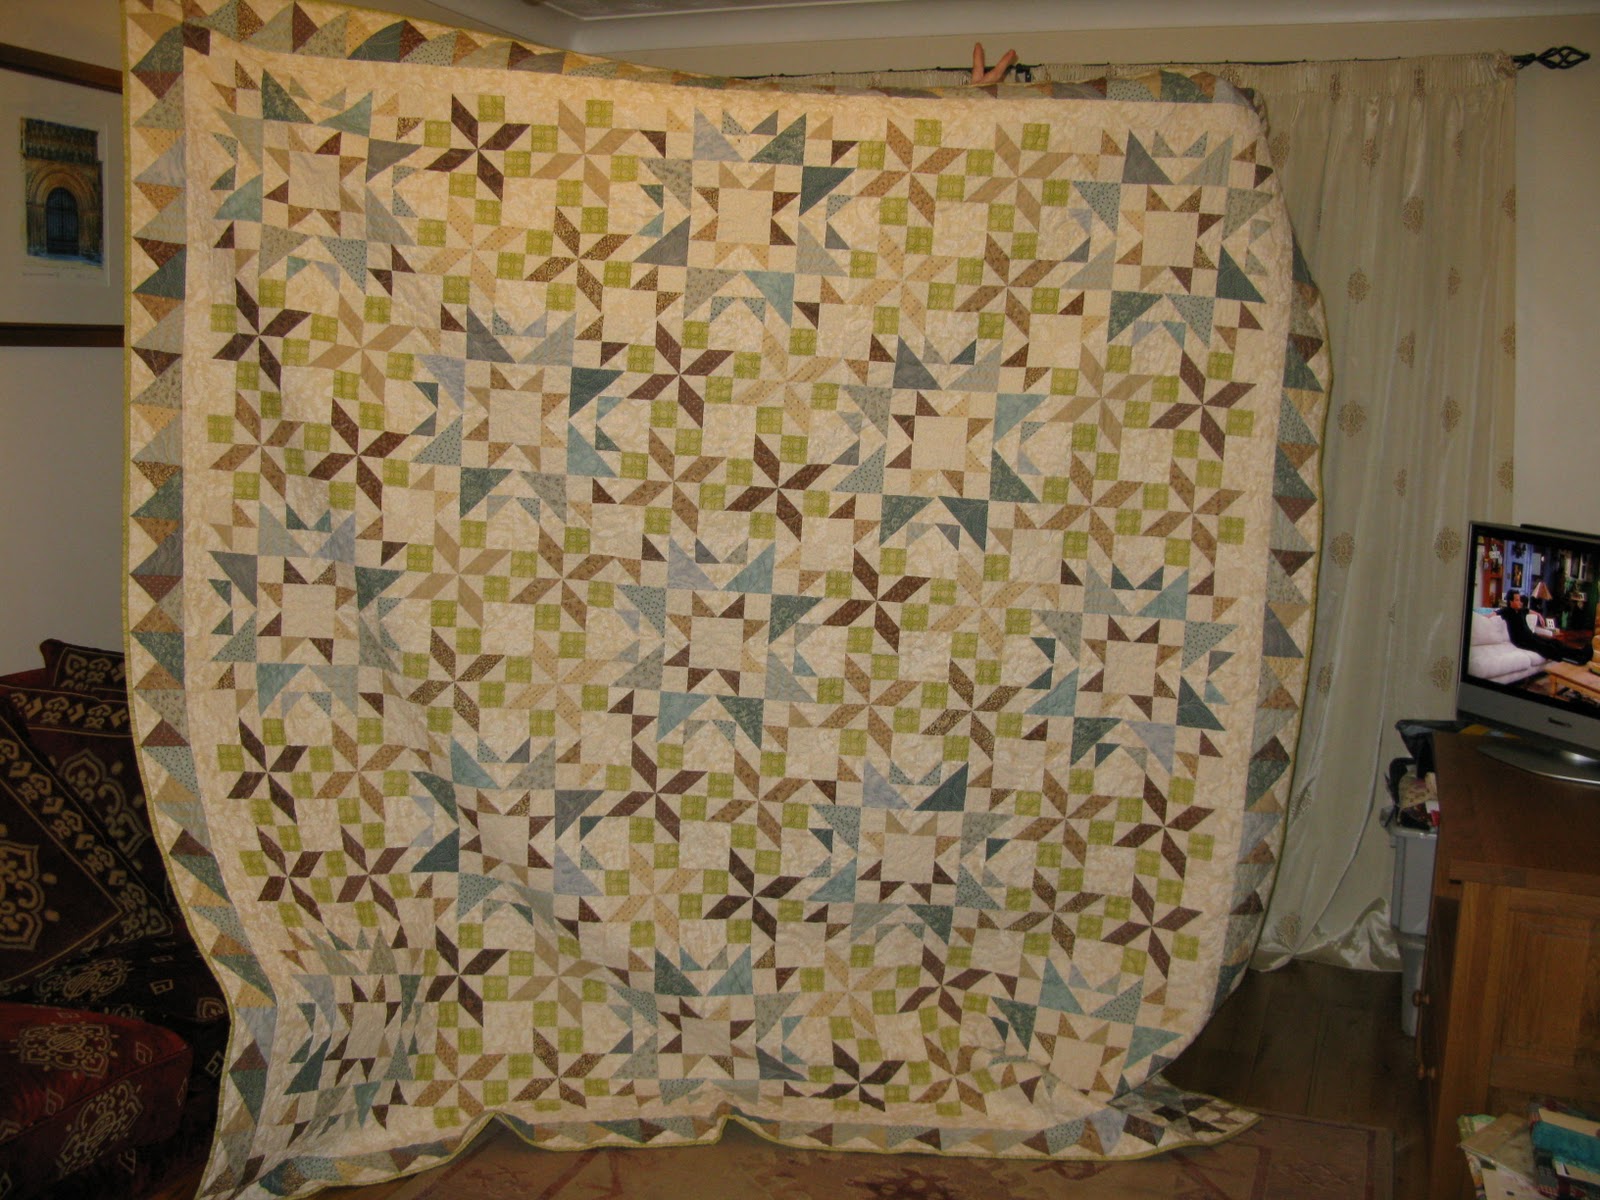 Quilting Prolifically: My Finished quilts